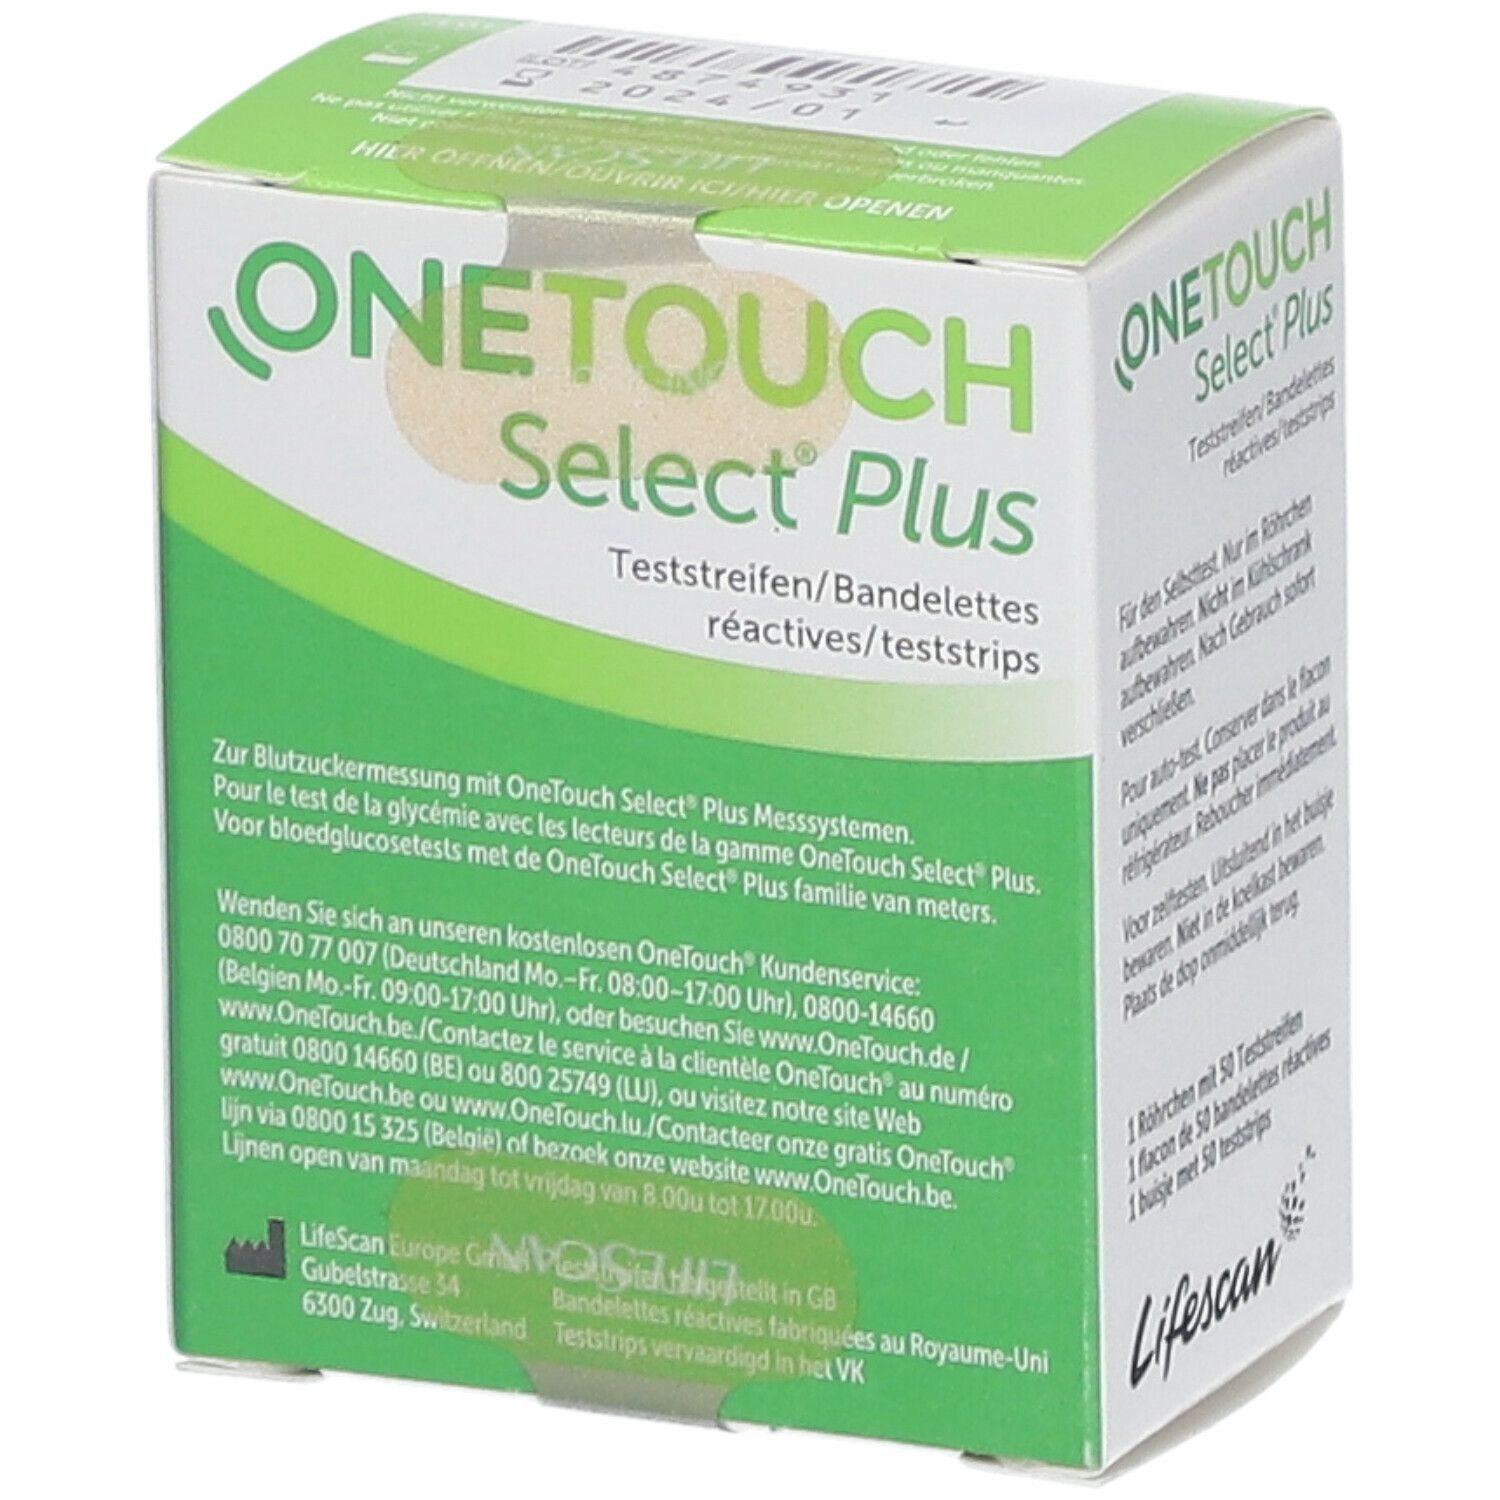 ONETOUCH® Select Plus